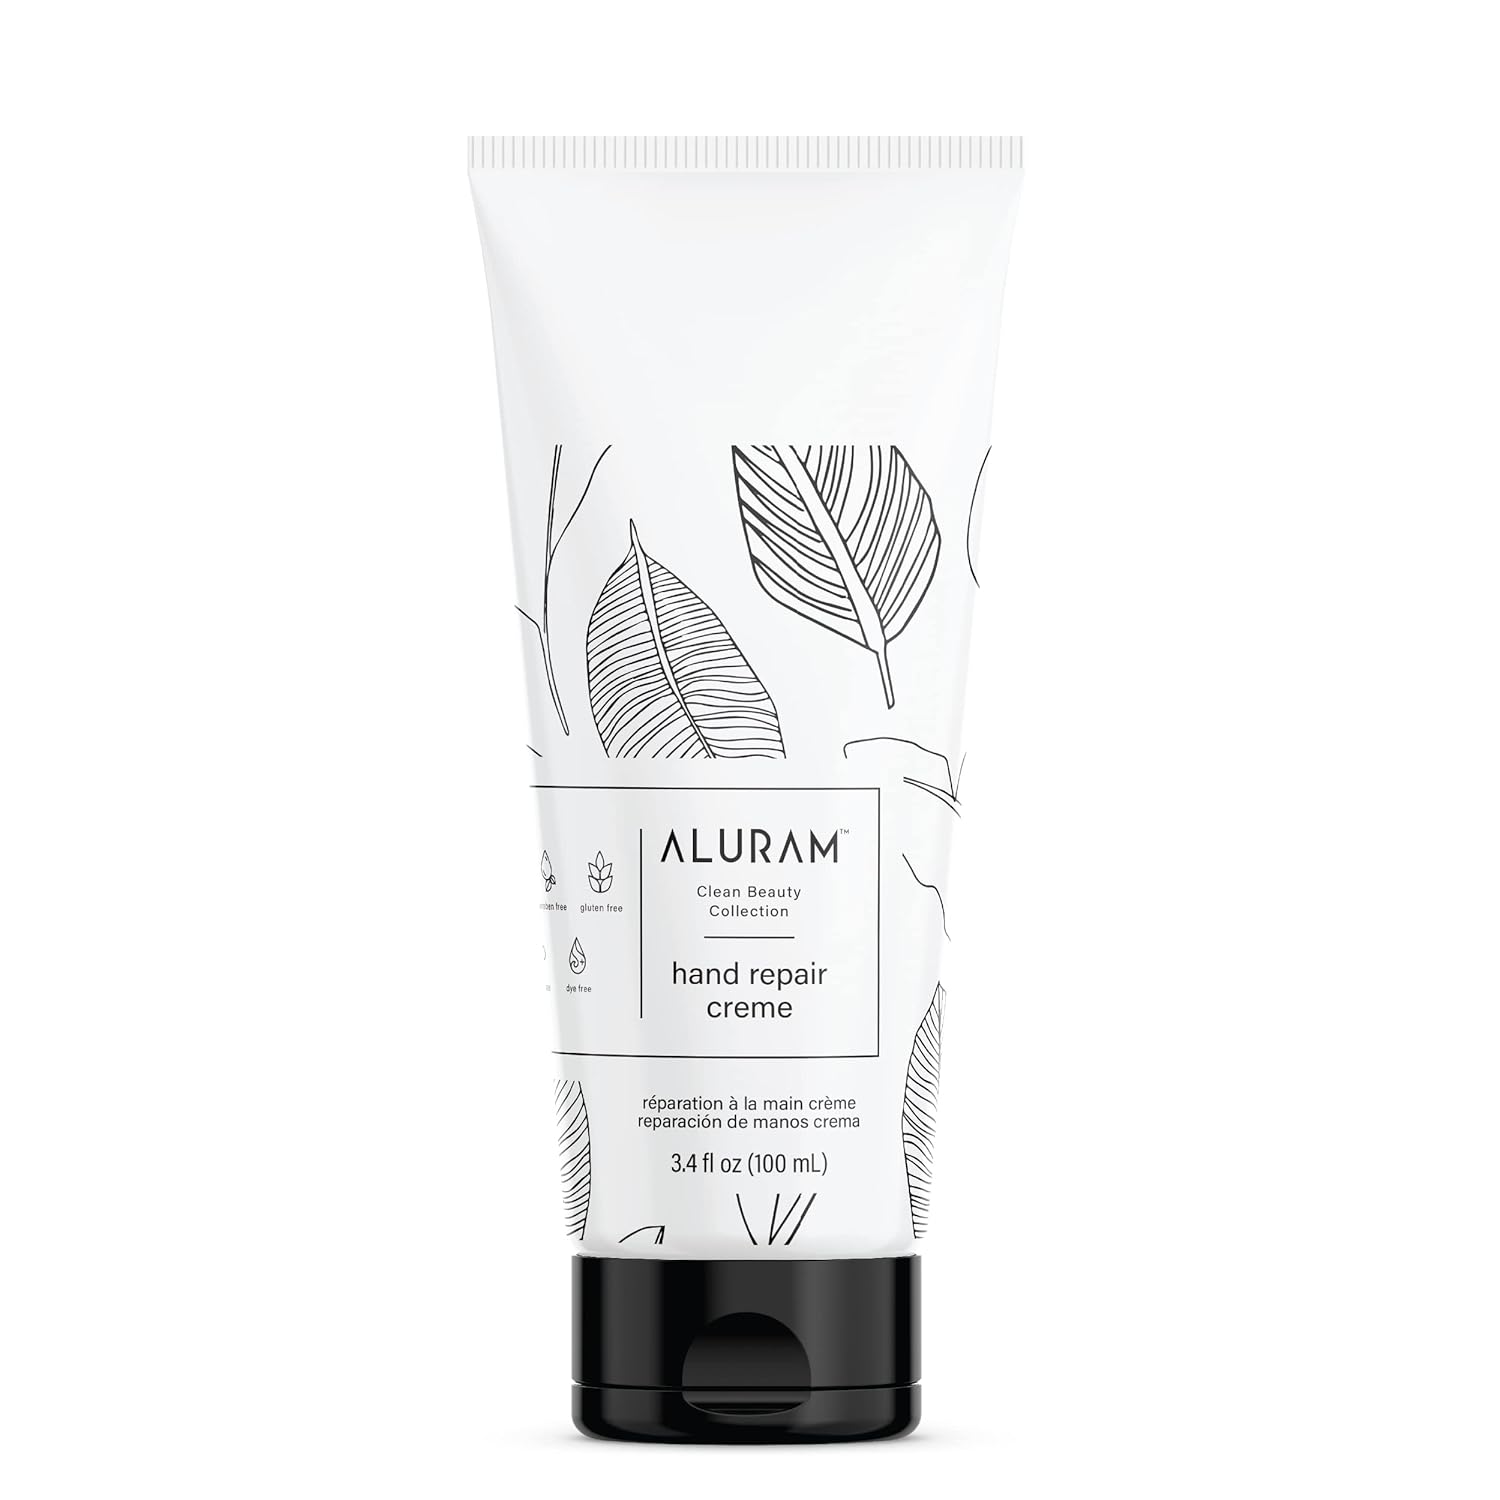 Aluram Hand Repair Creme, Shea Butter & Coconut Oil Moisturizing Lotion for Soft, Smooth Hands 3.4 Fl Oz